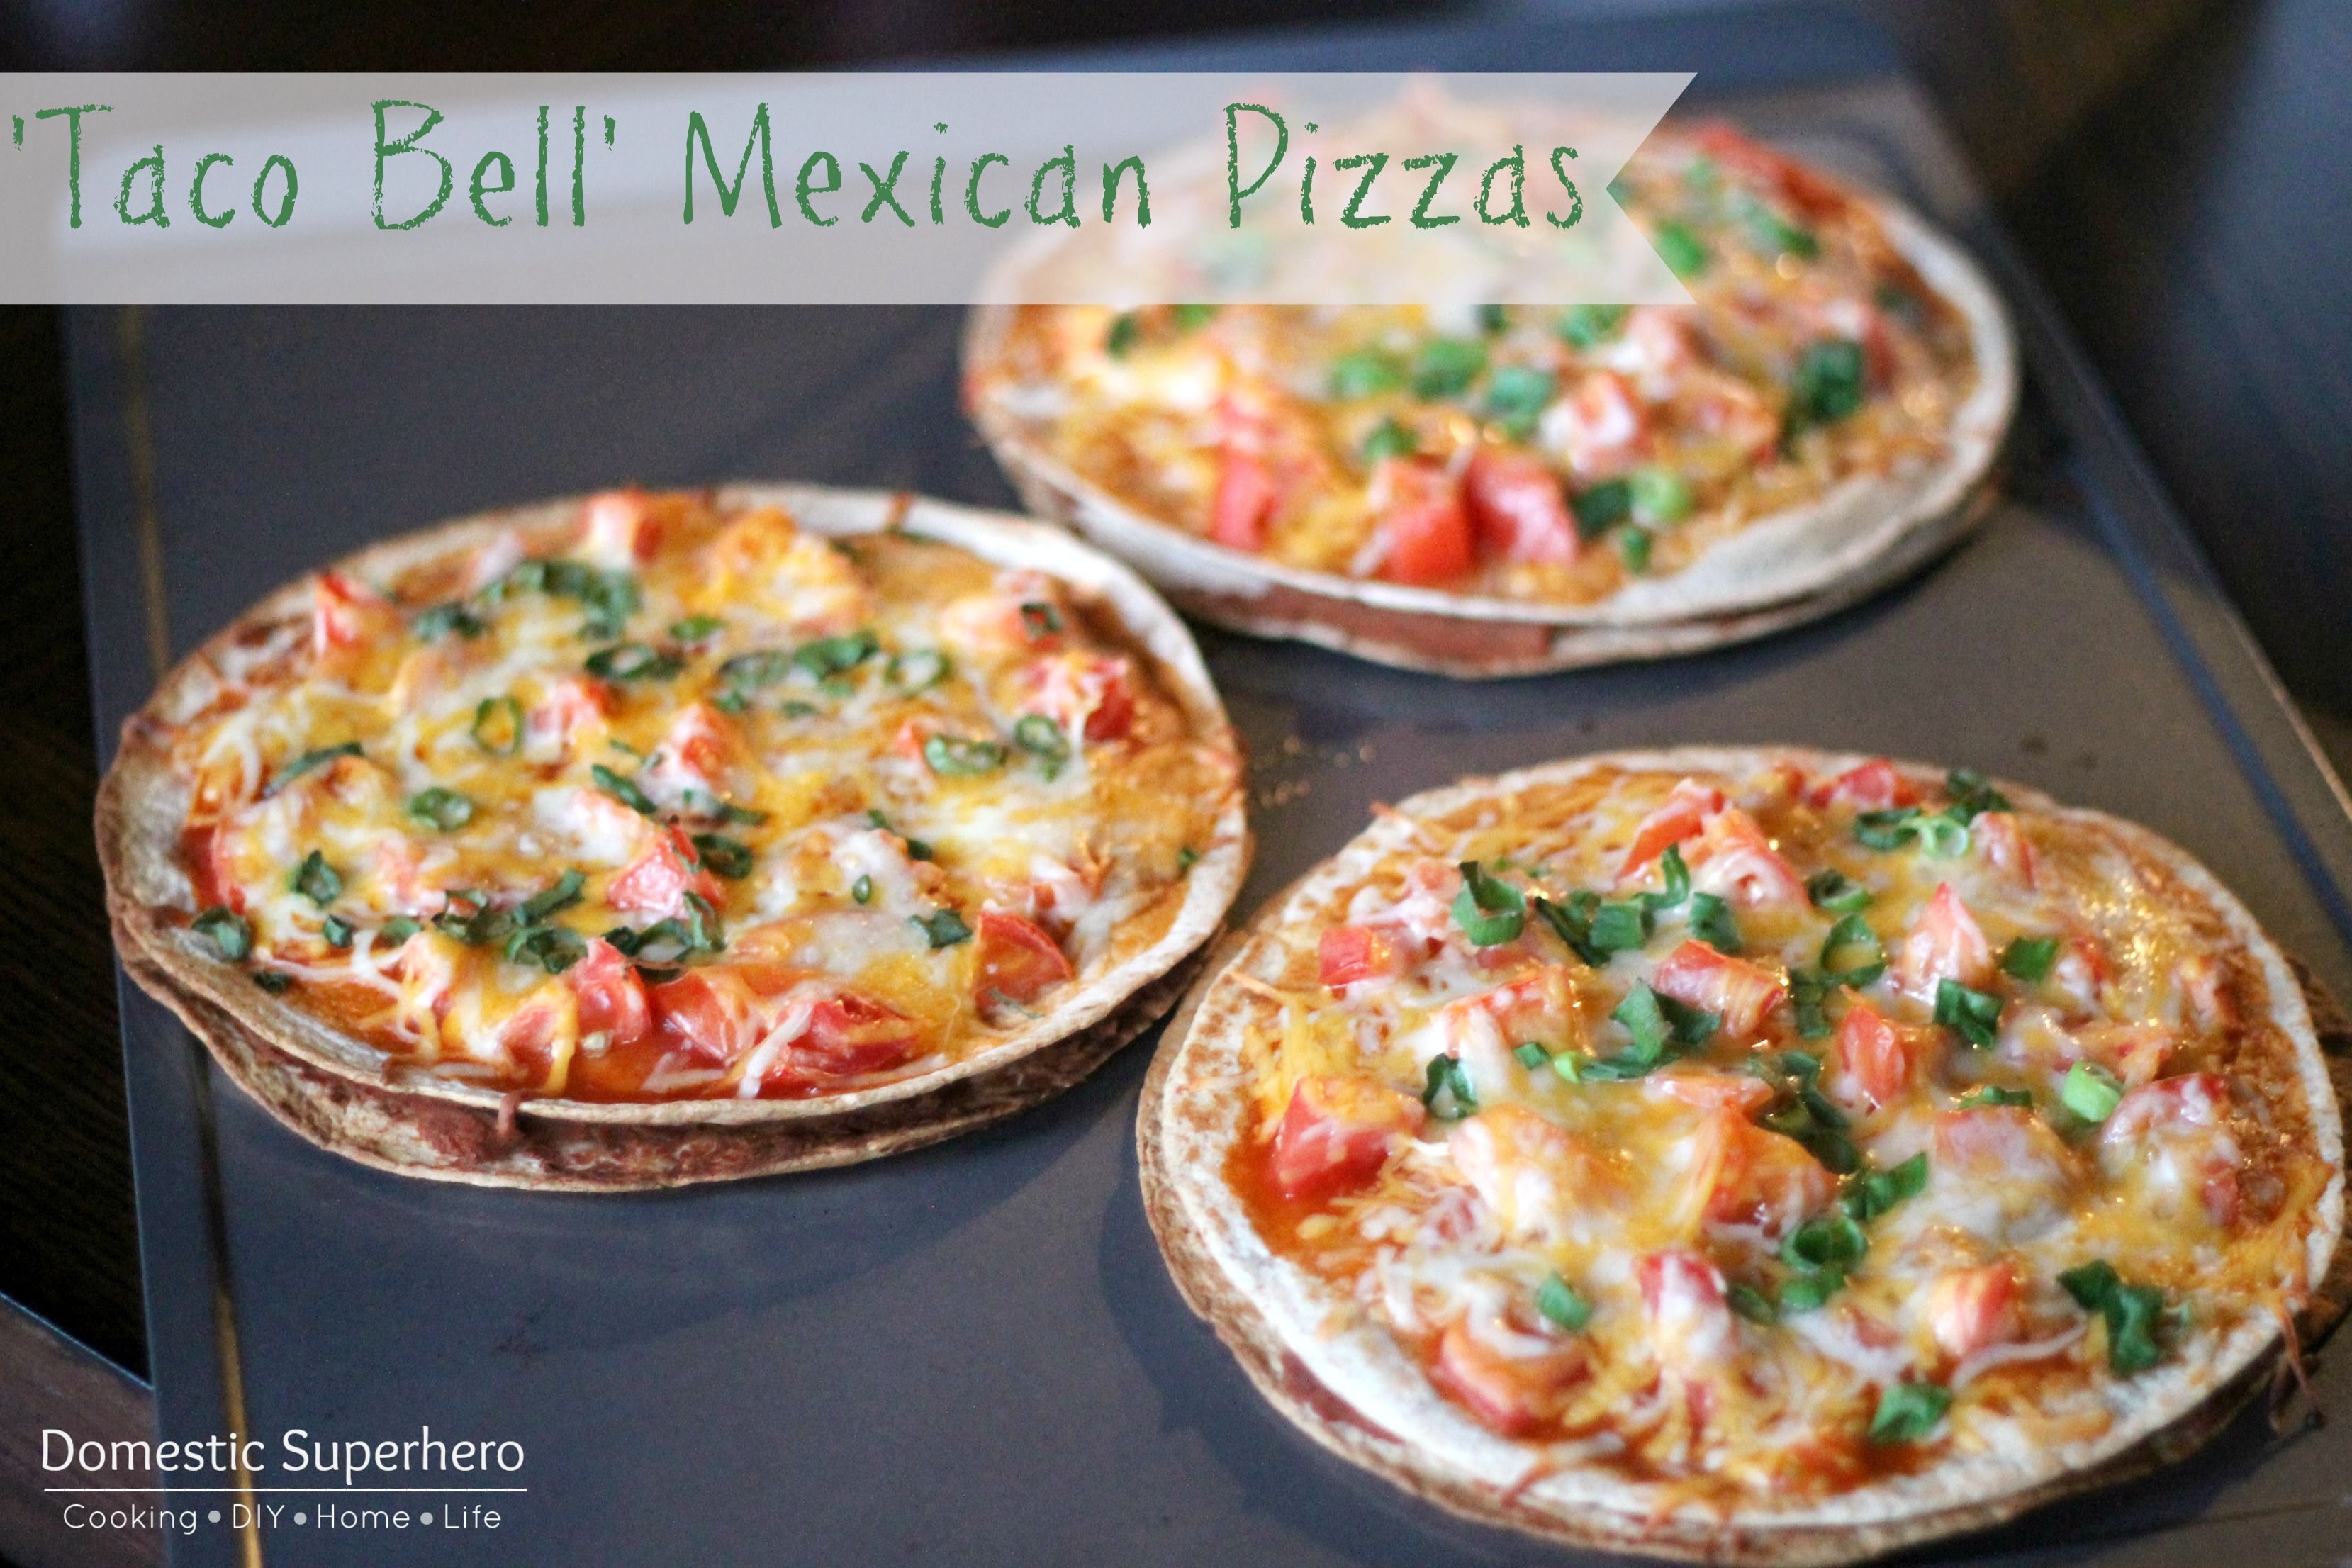 Taco Bell Mexican Pizzas – less than 400 calories and fresh ingredients!